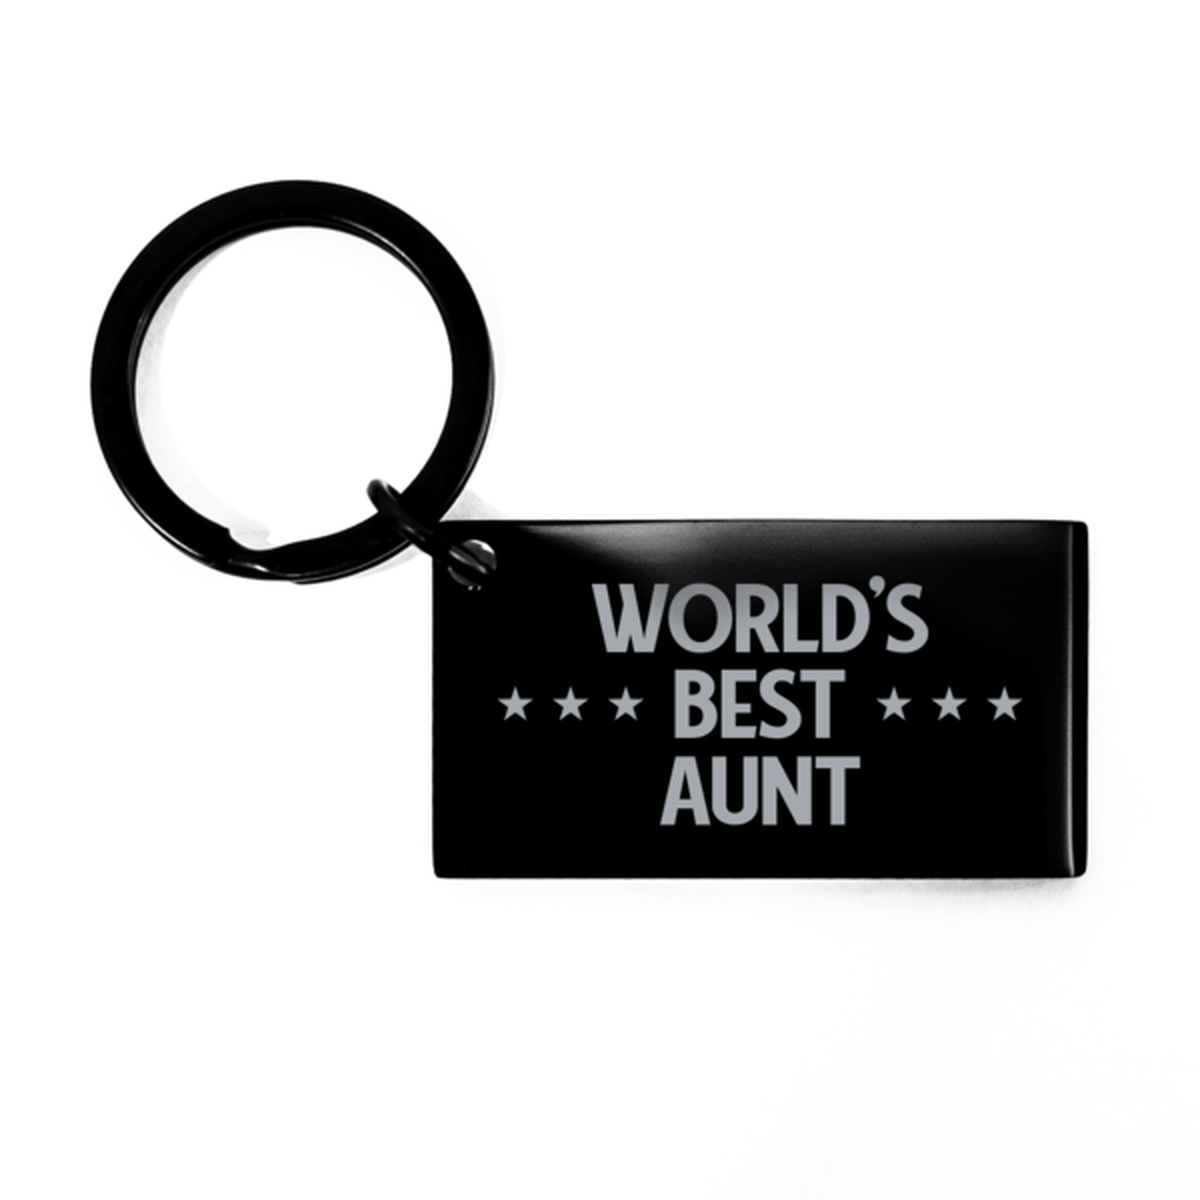 Worlds Best Aunt Gifts, Funny Black Engraved Keychain For Aunt, Birthday Presents For Women